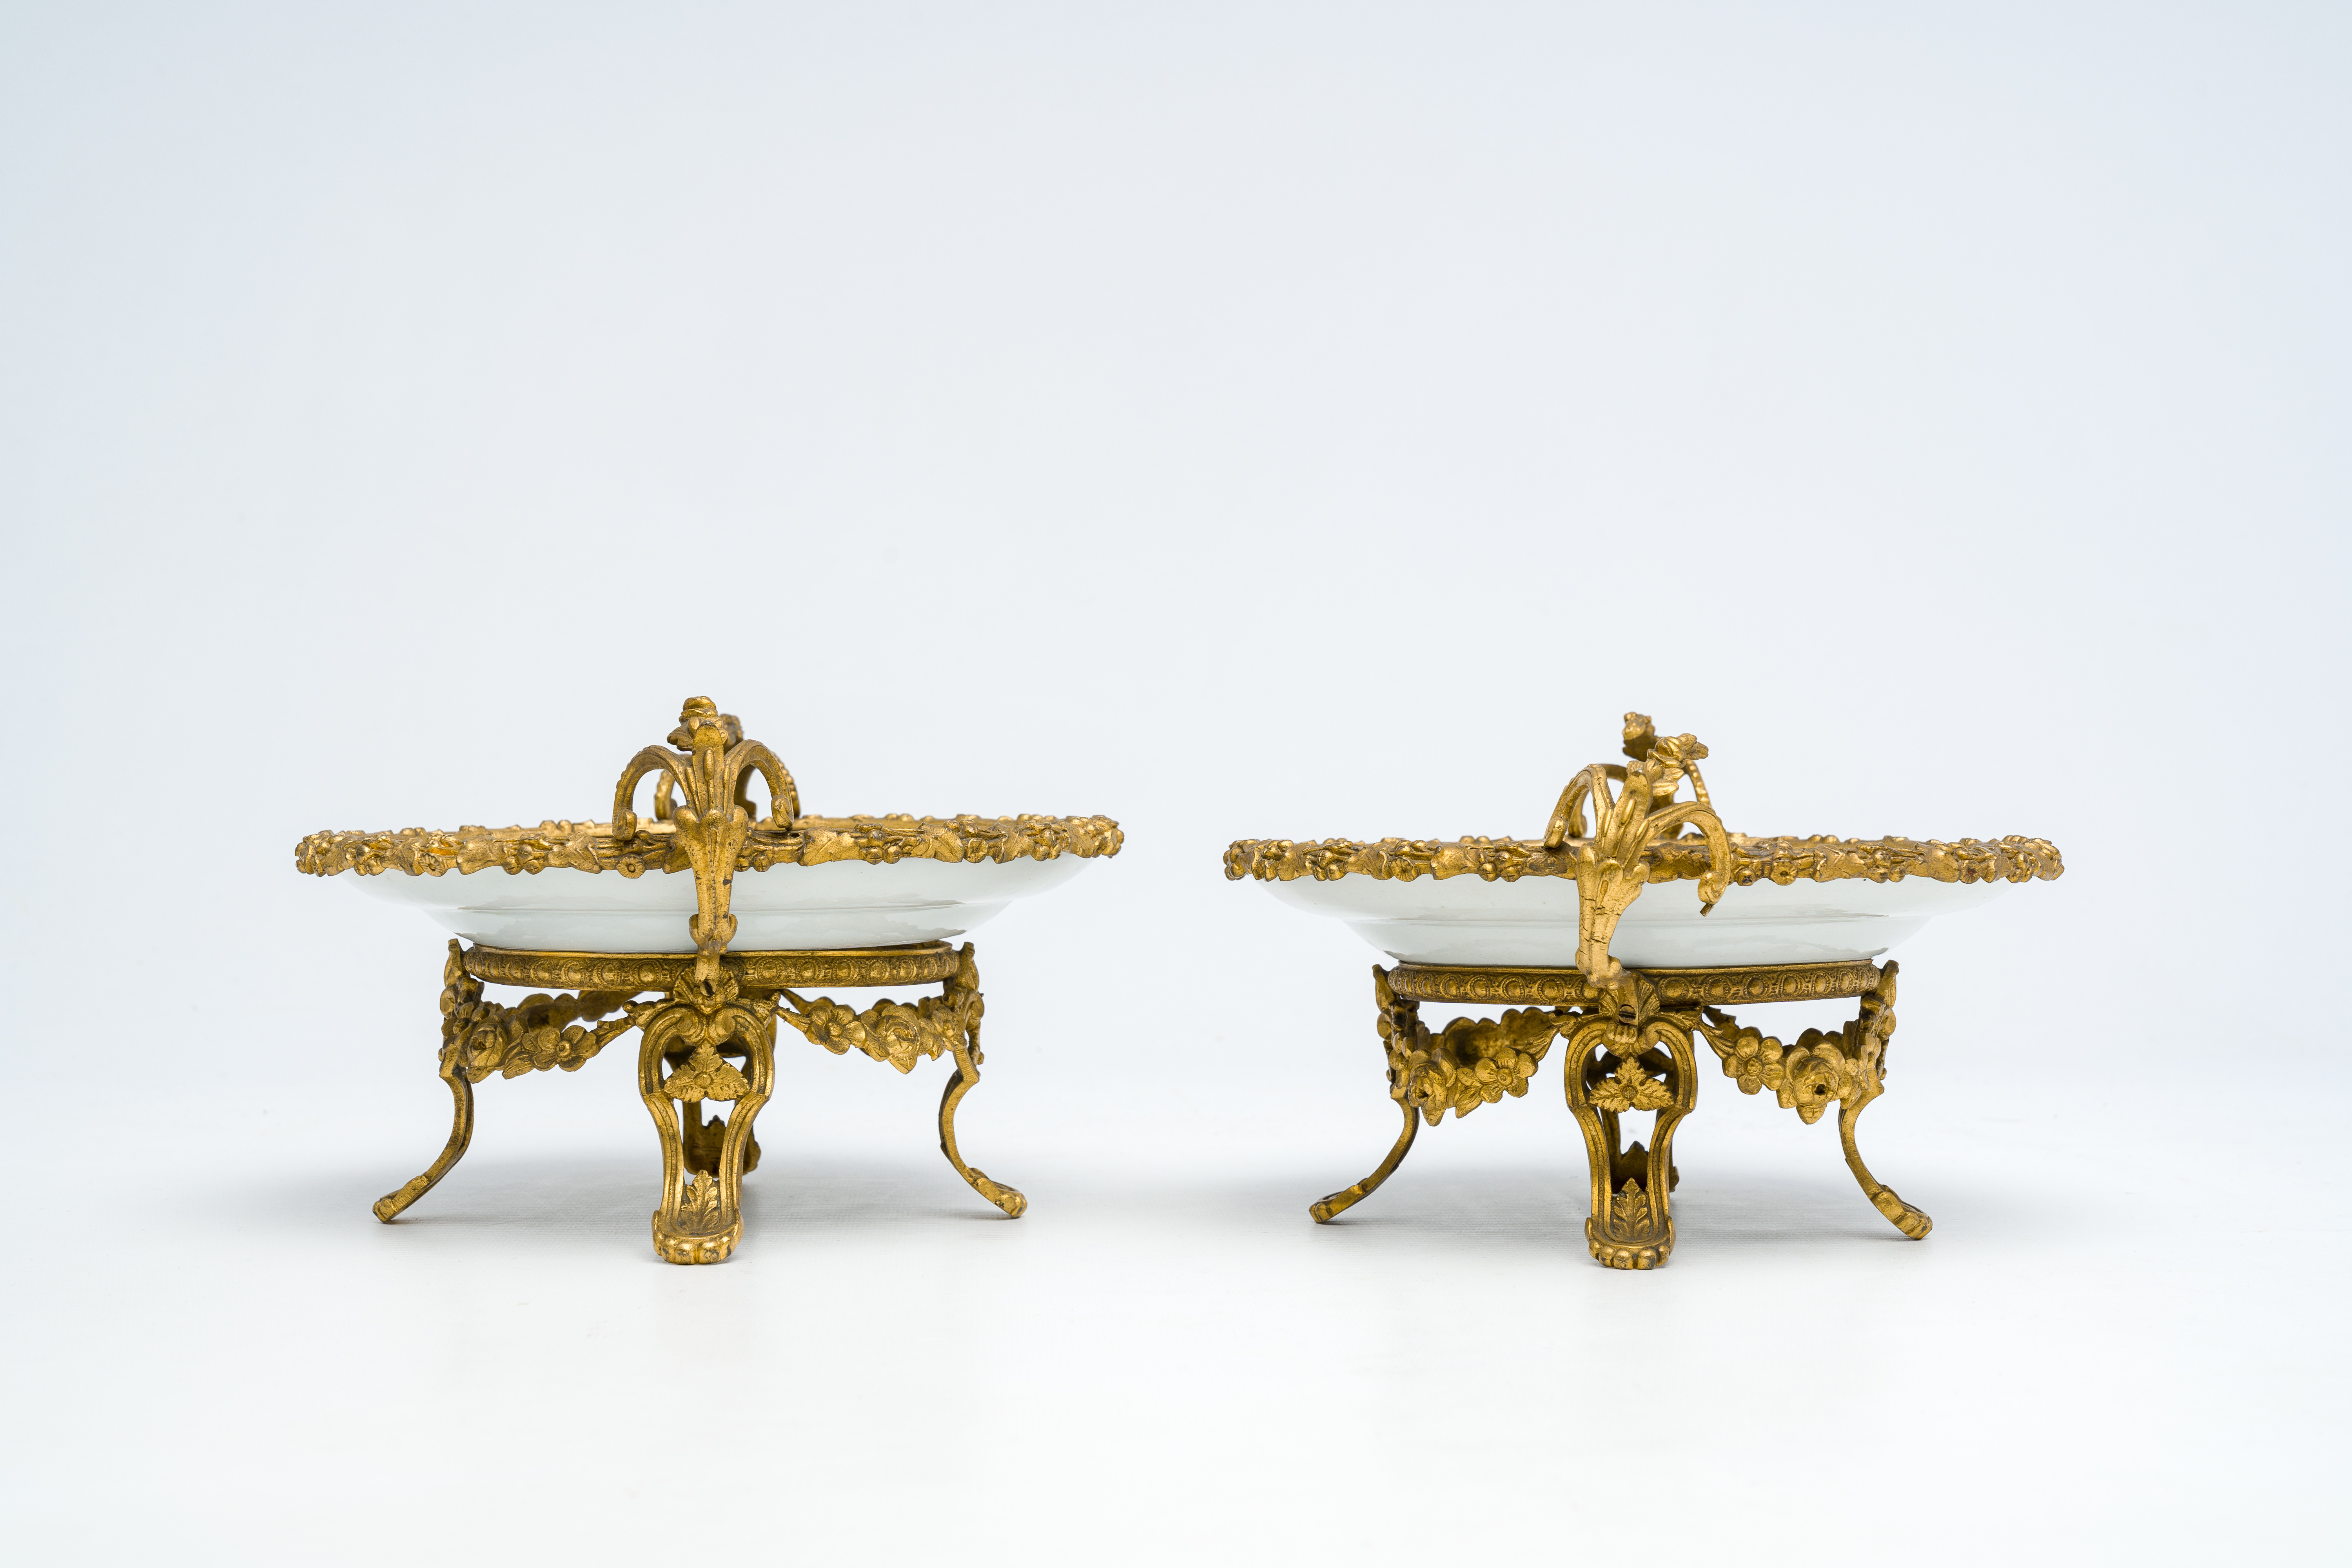 Two Chinese Canton famille rose gilt bronze mounted plates with figures on a terrace, 19th C. - Image 5 of 7